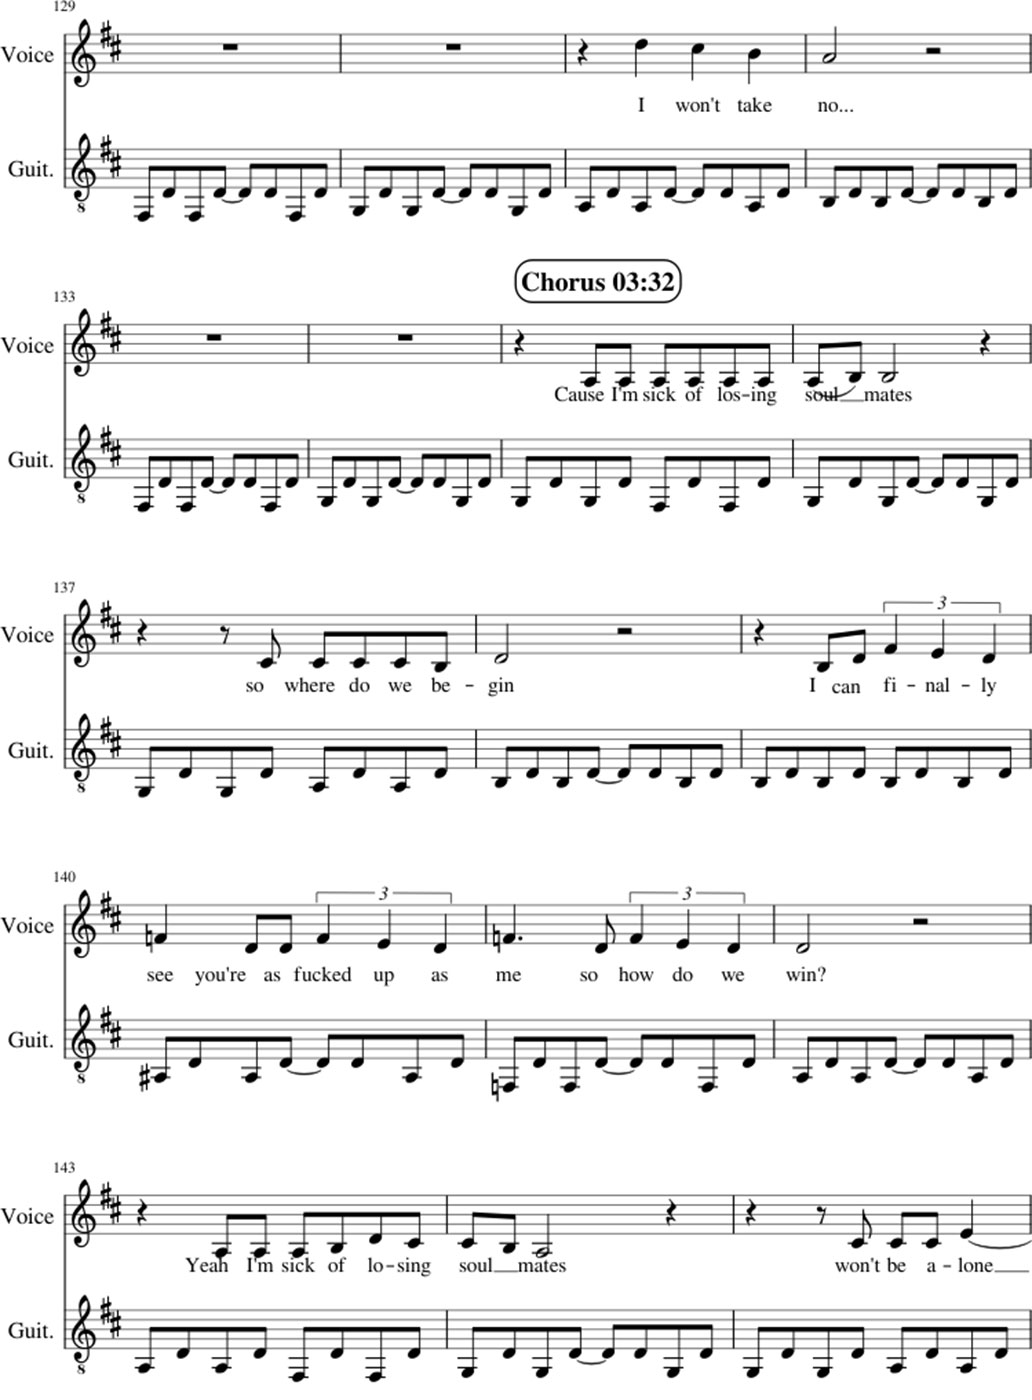 Sick of losing soulmate sheet music notes 8